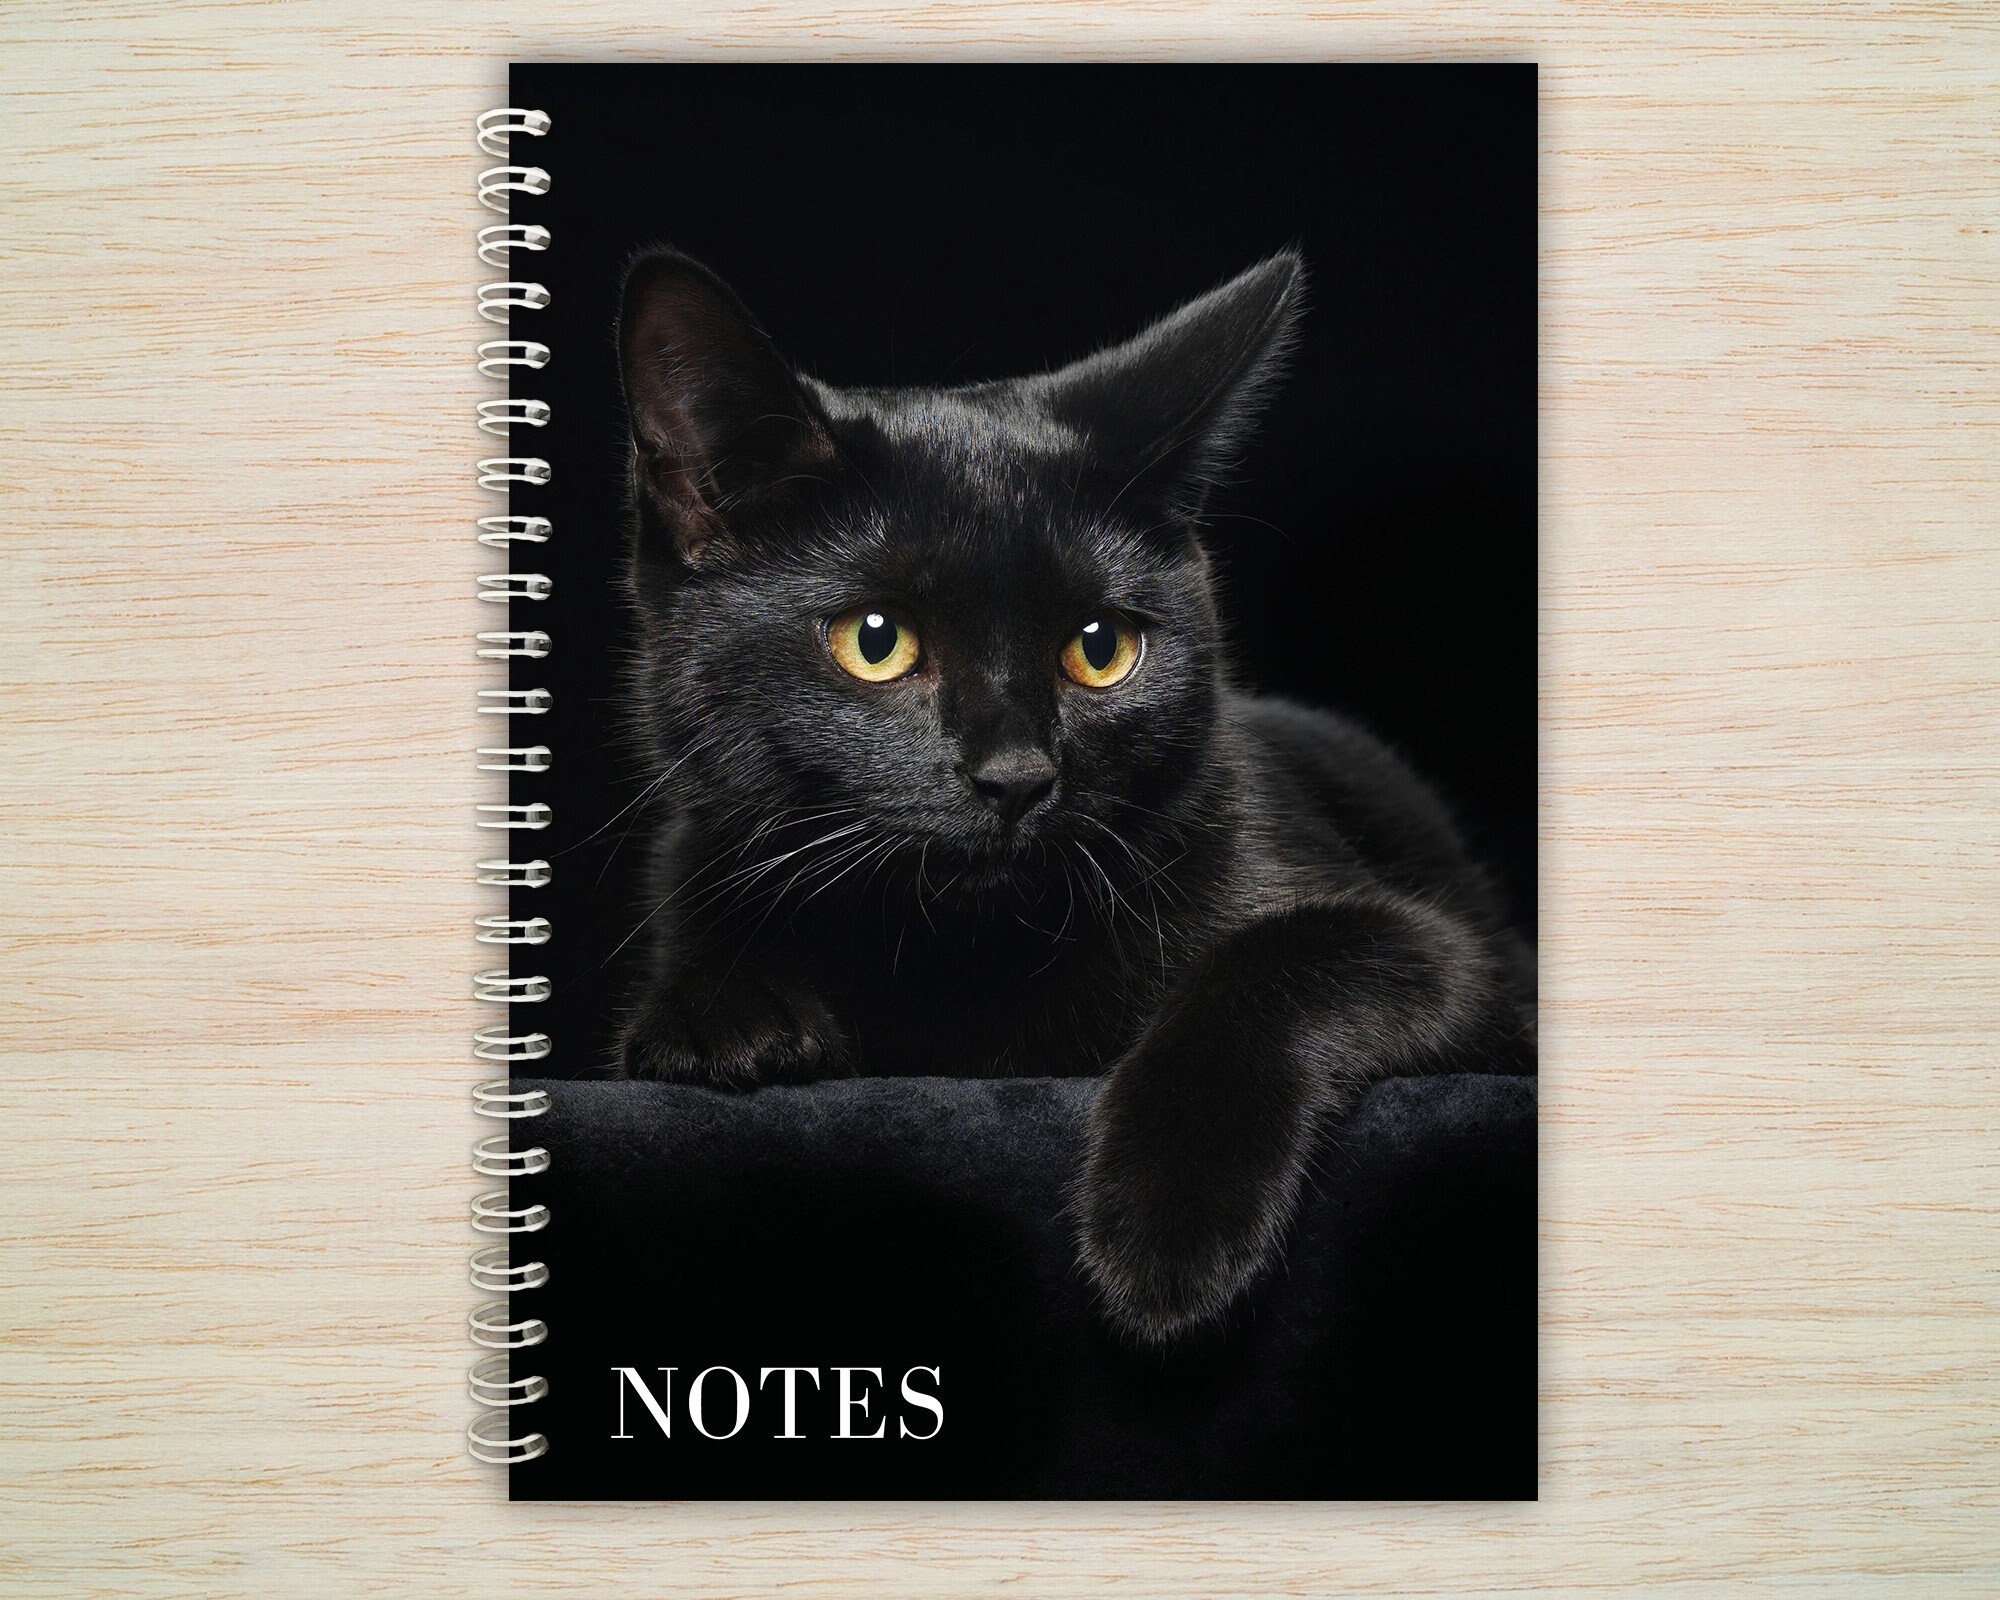 Black Cat Notebook Plain or Lined paper Notepad Lists Notes | Etsy